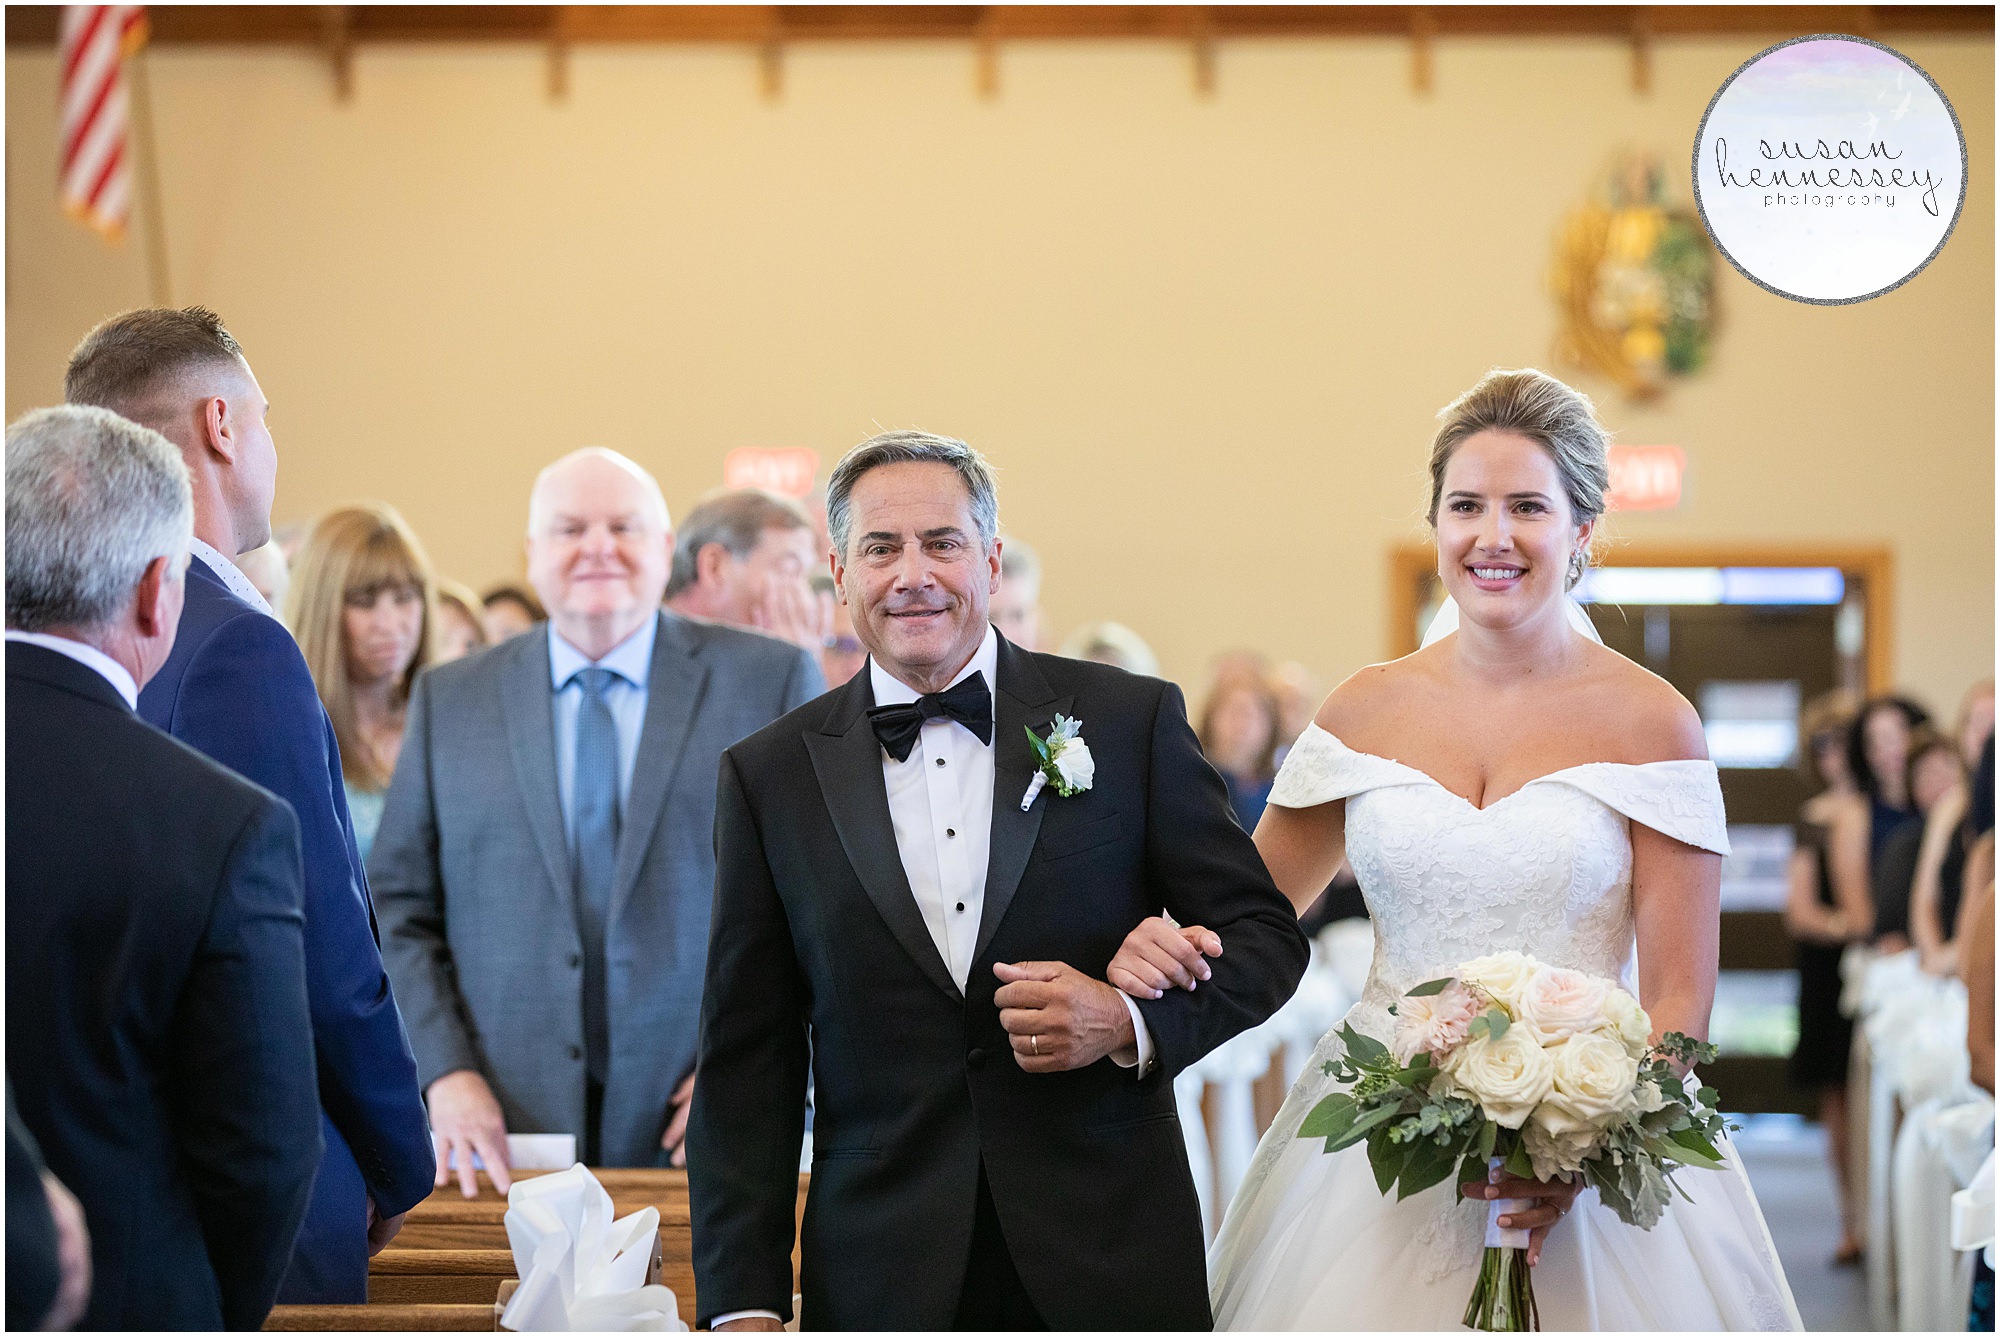 The bride's father escorts her down the aisle at her Catholic ceremony